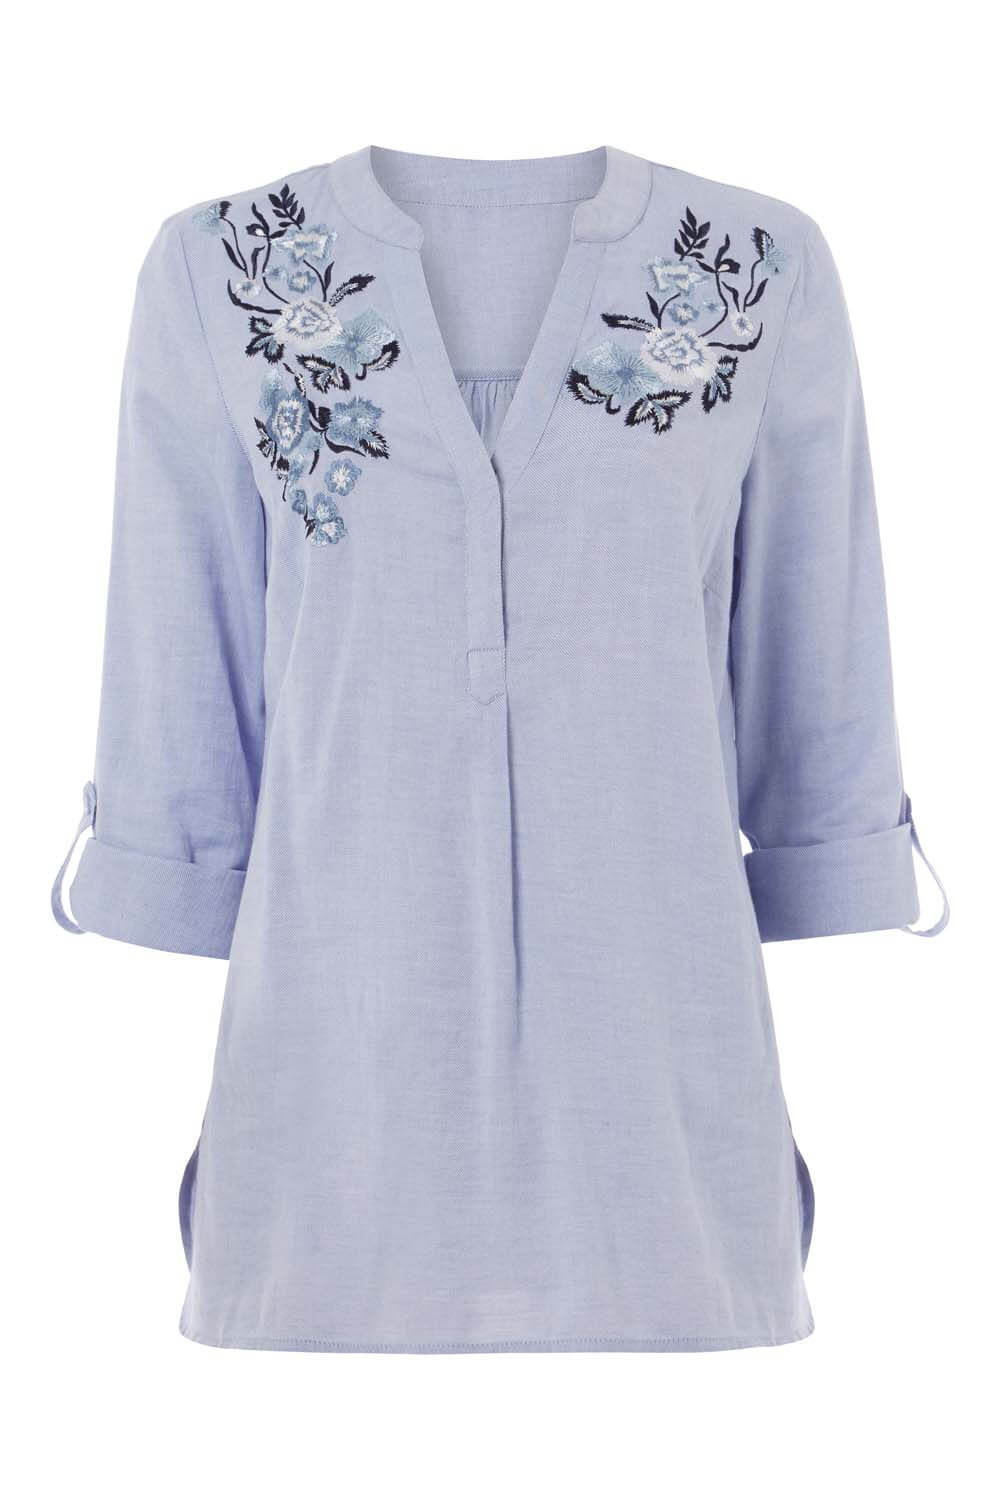 Blue Floral Embroidered Shirt , Image 5 of 5